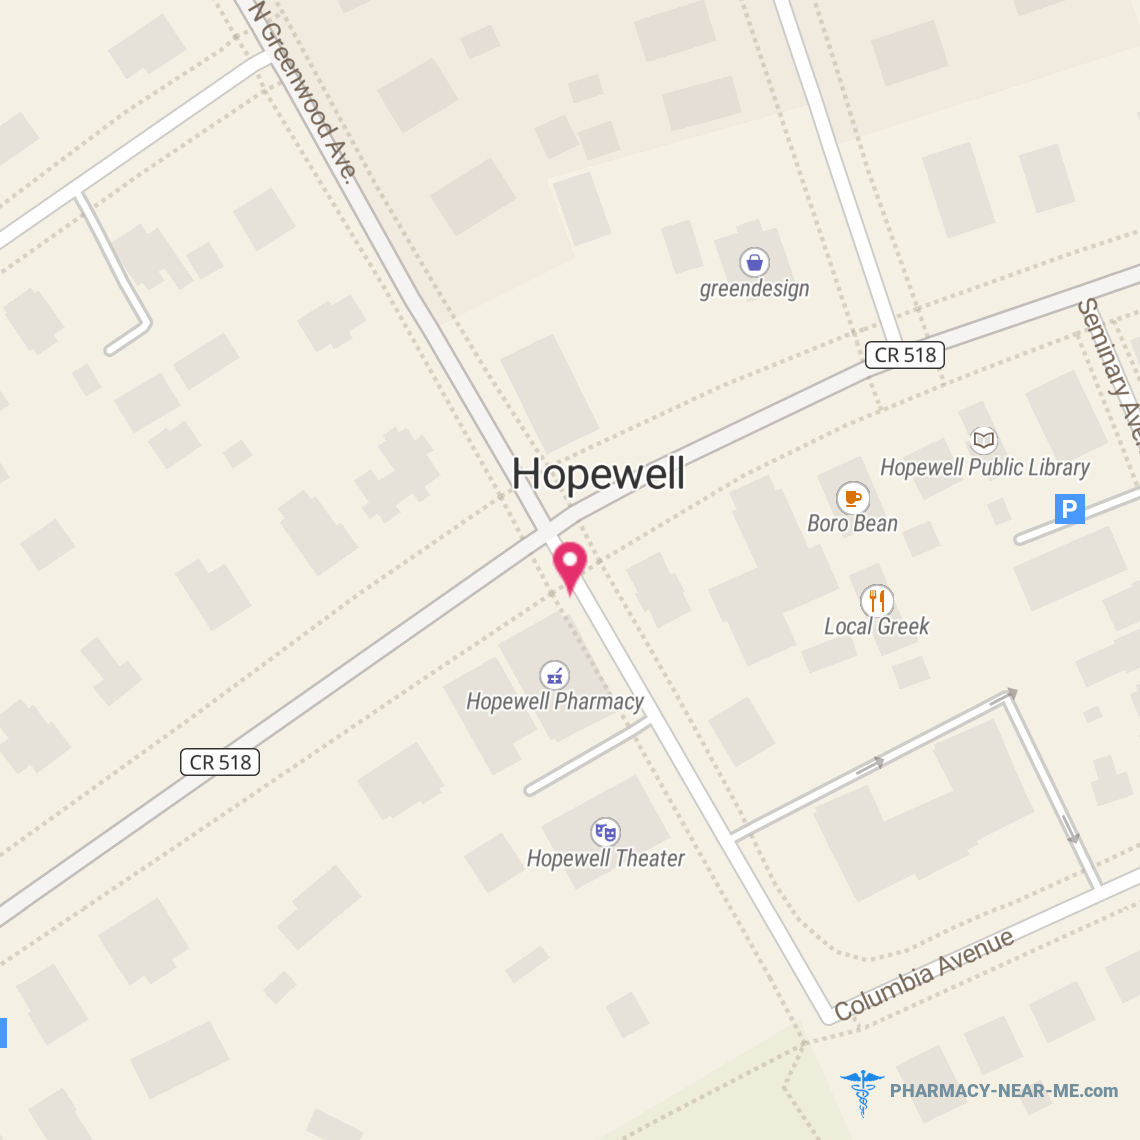 HOPEWELL PHARMACY - Pharmacy Hours, Phone, Reviews & Information: 1 West Broad Street, Hopewell, New Jersey 08525, United States